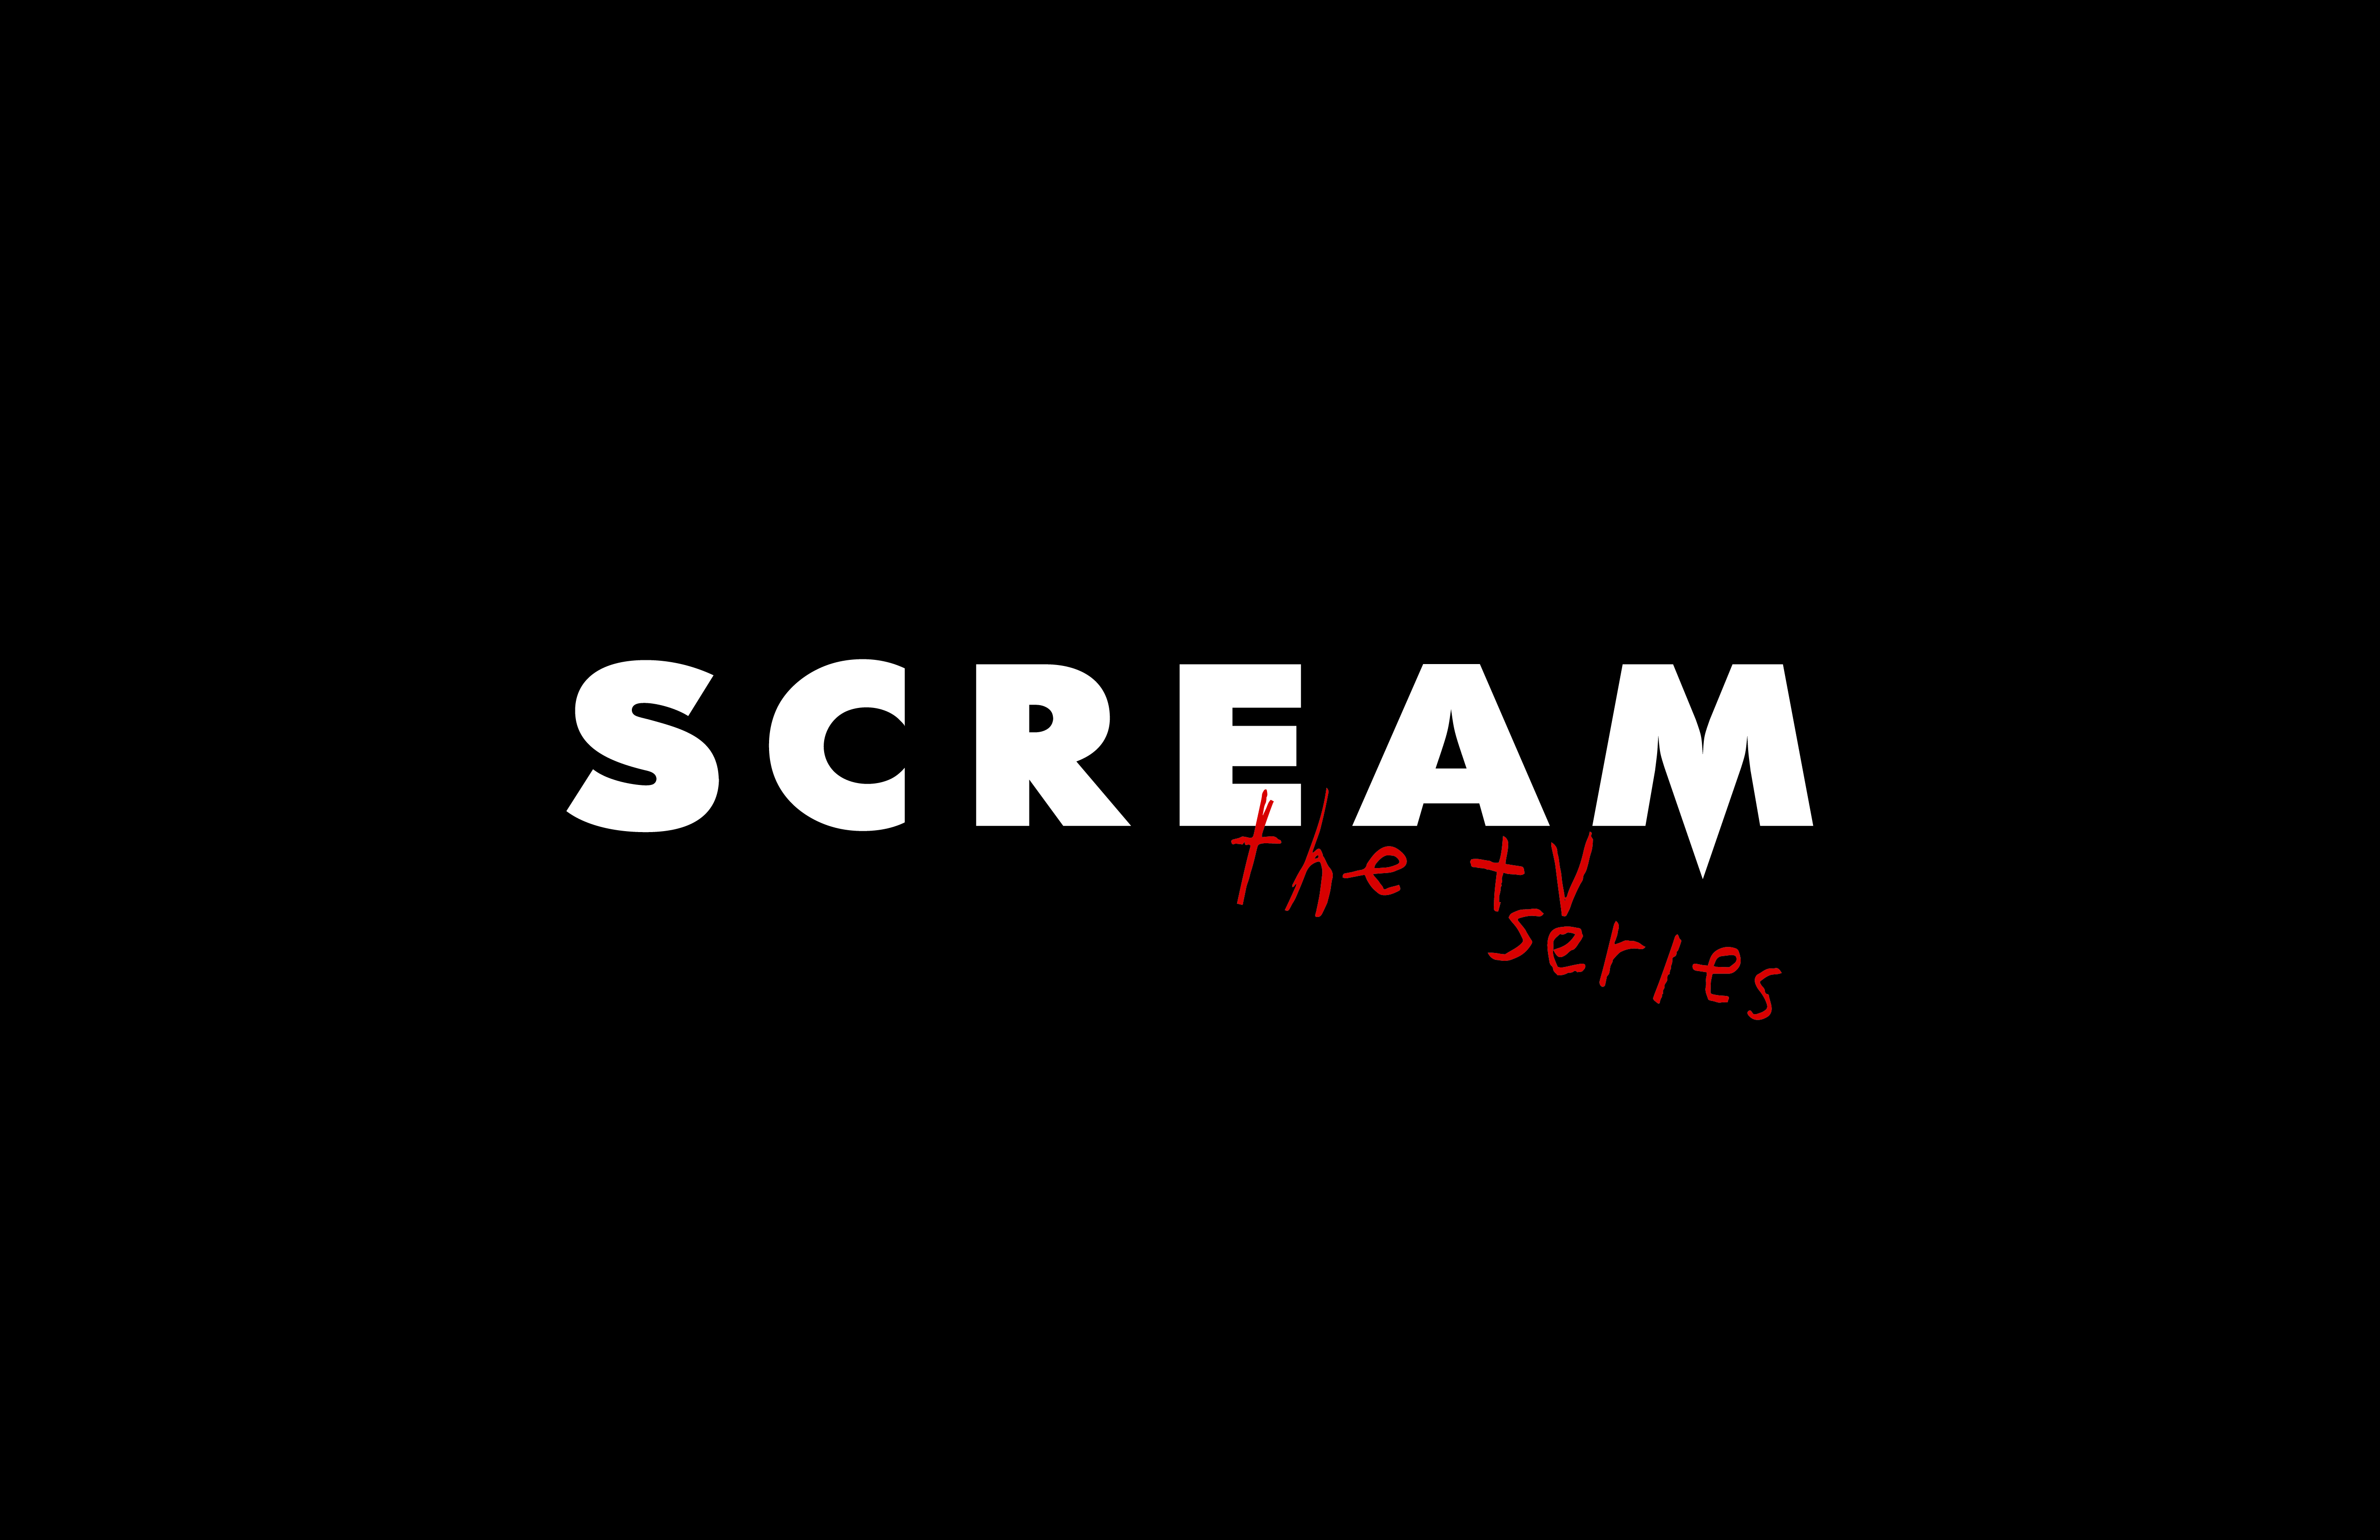 Scream 2.01- “I Know What You Did Last Summer”